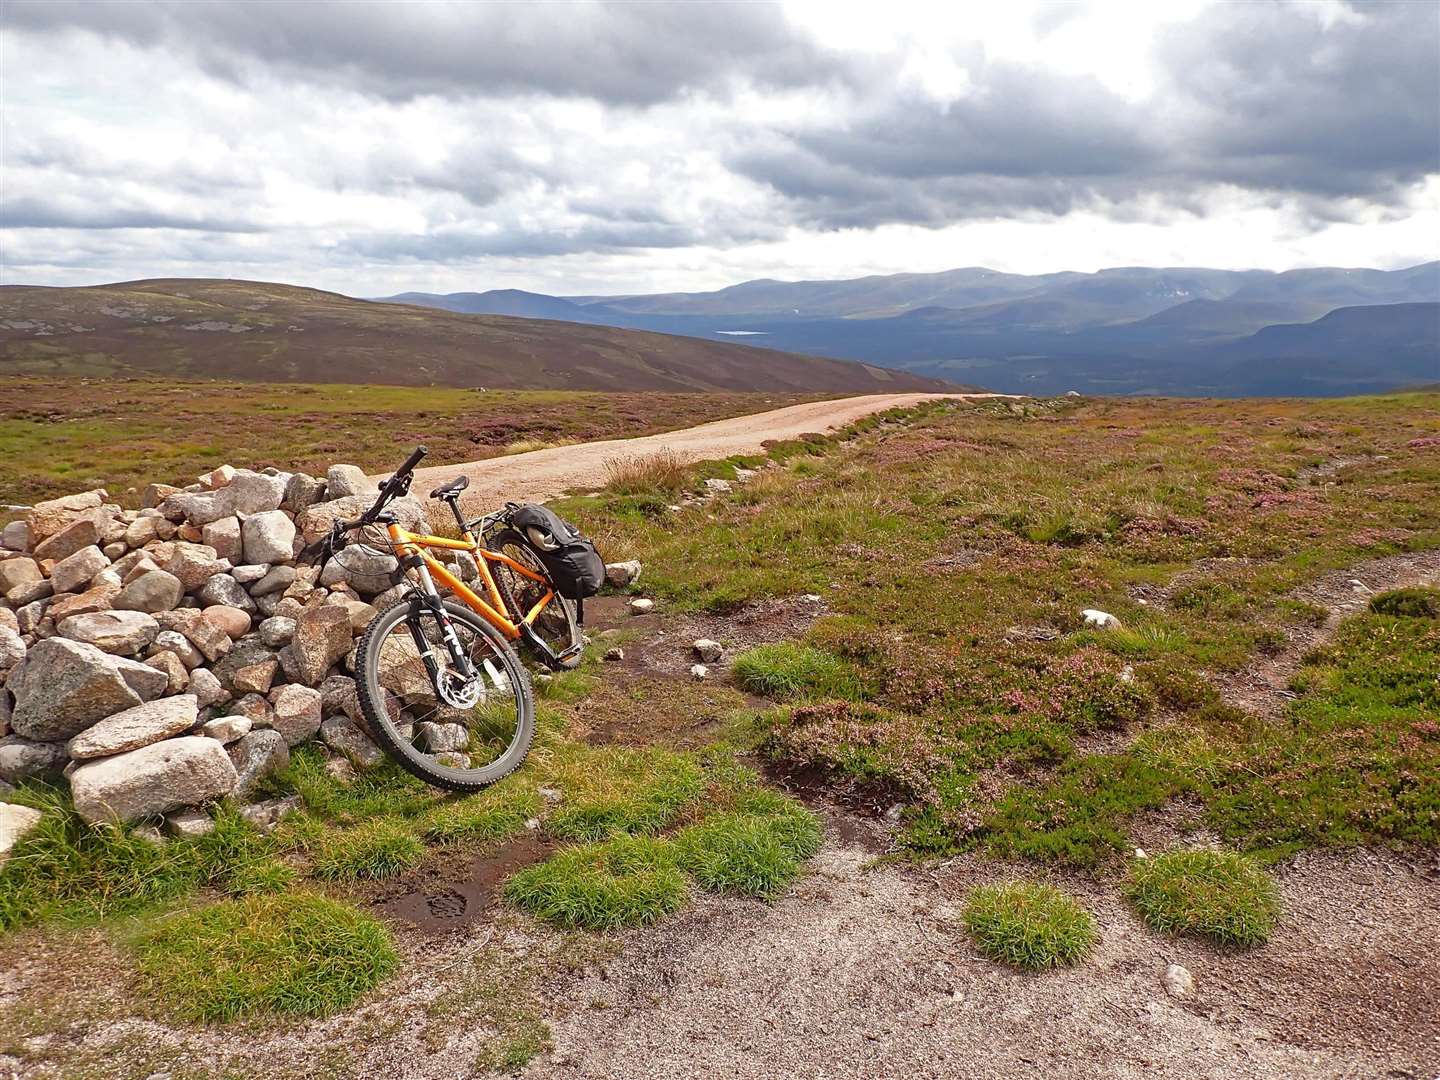 Leaving the bike to head up Geal-charn Mor.